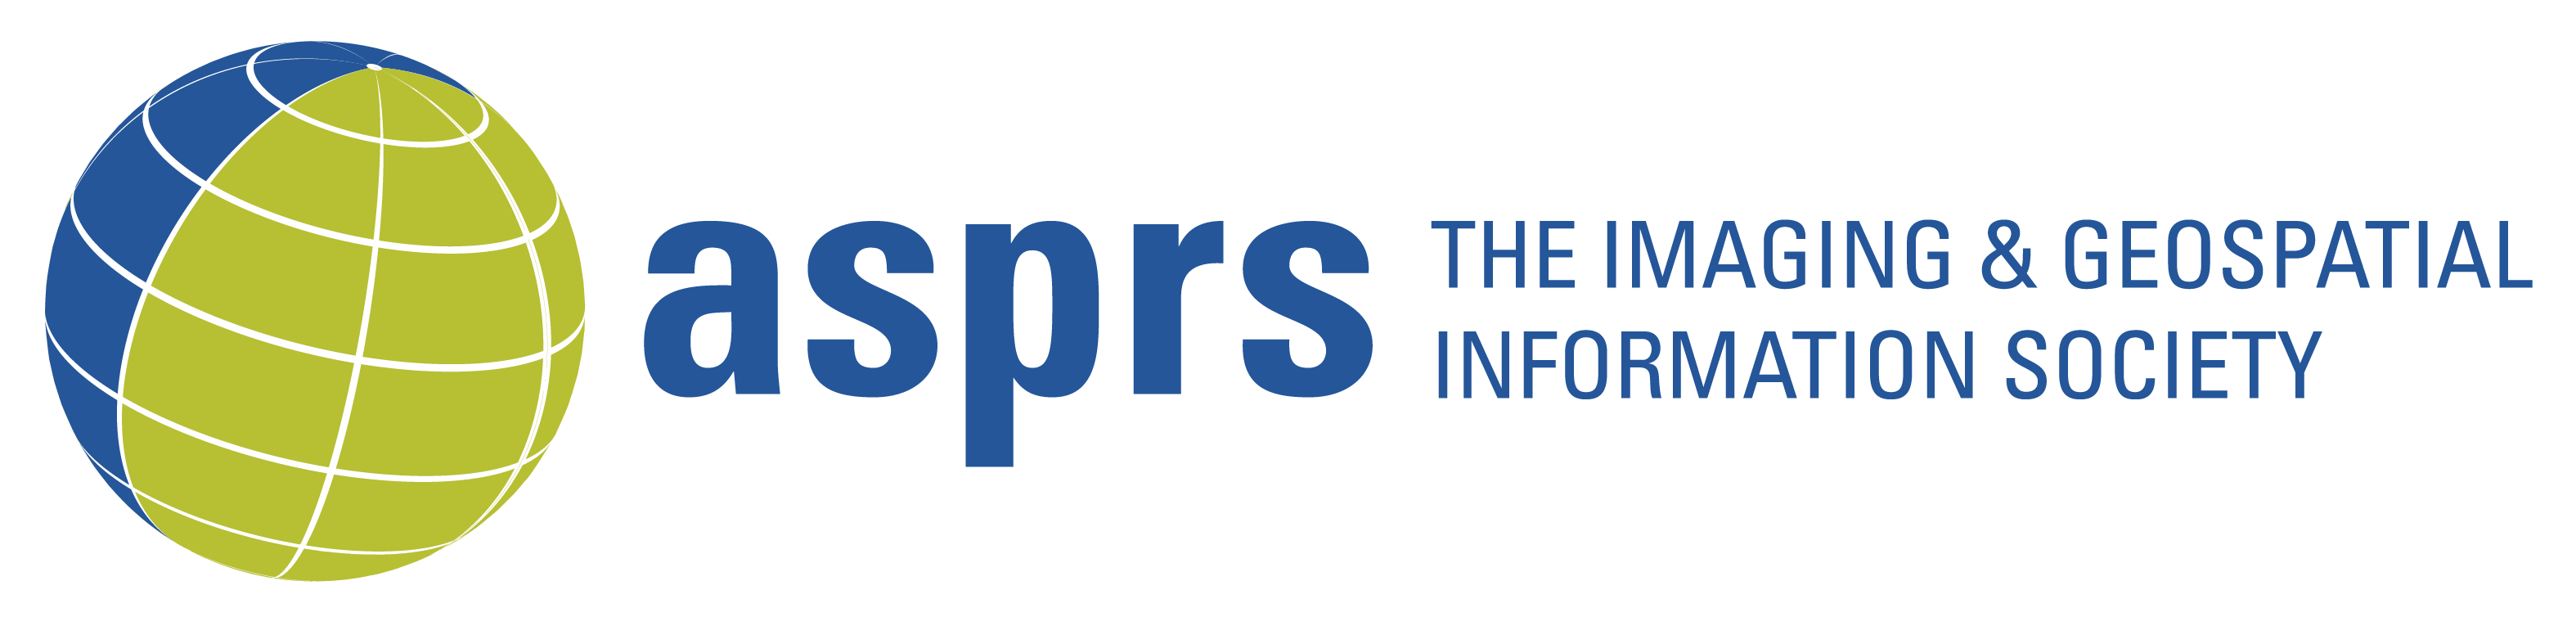 ASPRS, The Imaging and Geospatial Information Society